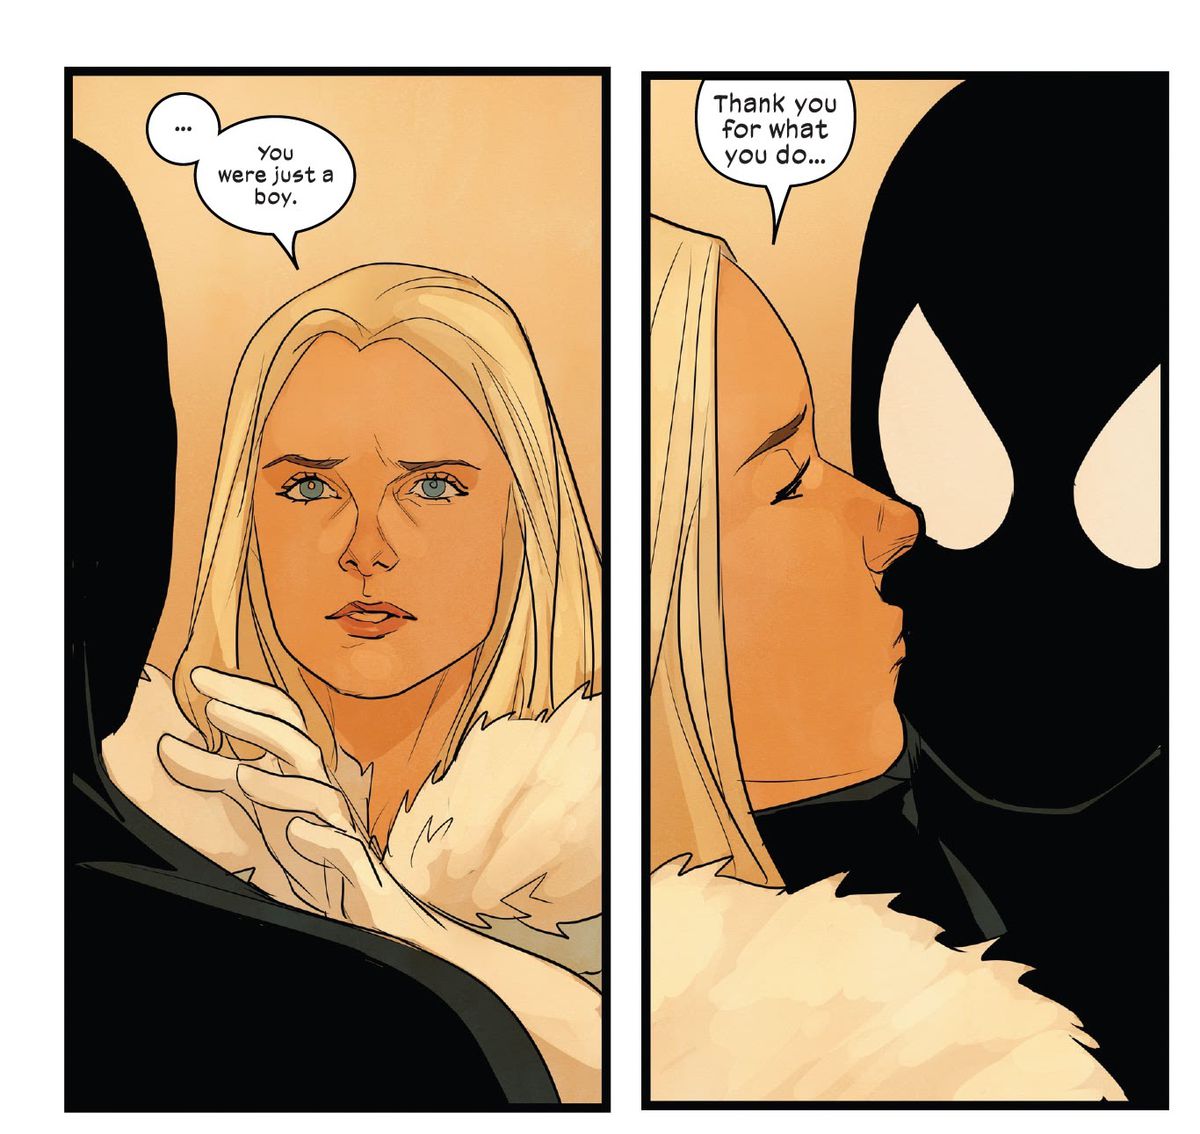 “...You were just a boy,” Emma frost says to Spider-Man, and then kisses him on the cheek and thanks him for what he does as a superhero in Devil’s Reign: X-Men #2 (2022). 